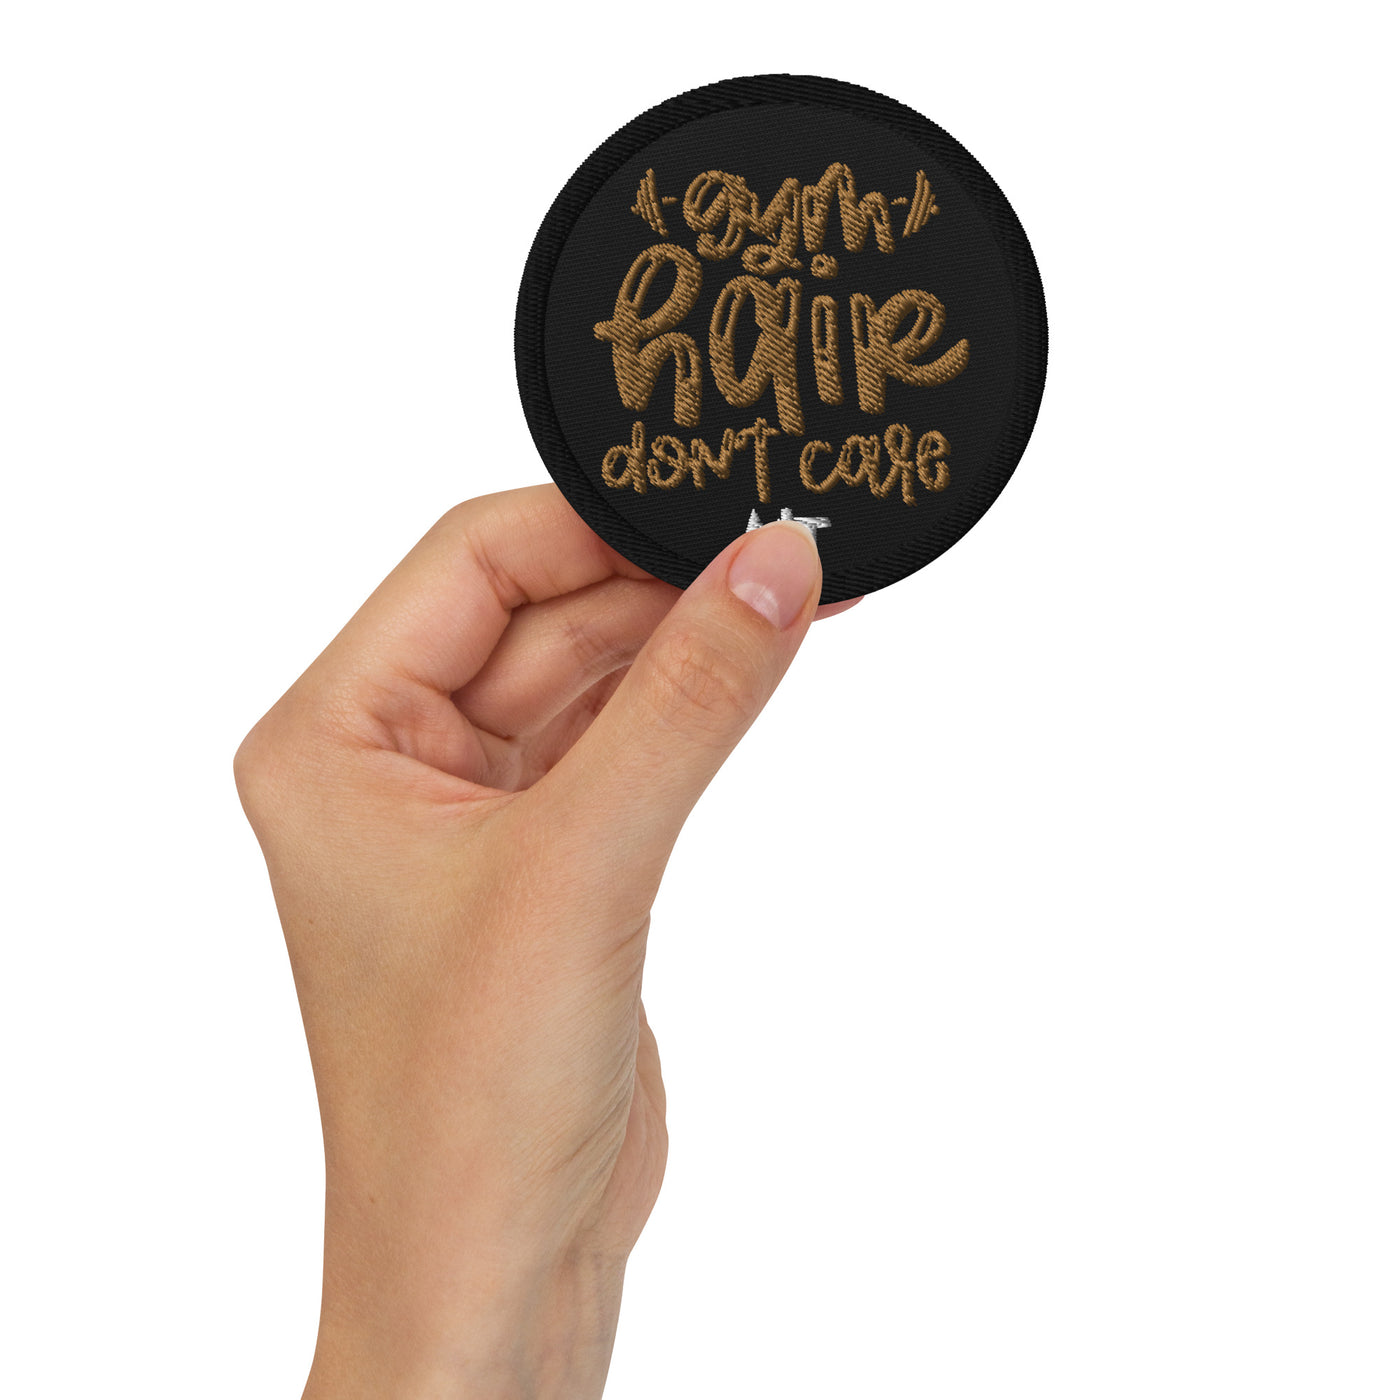 Gym Hair Don't Care - Embroidered patches